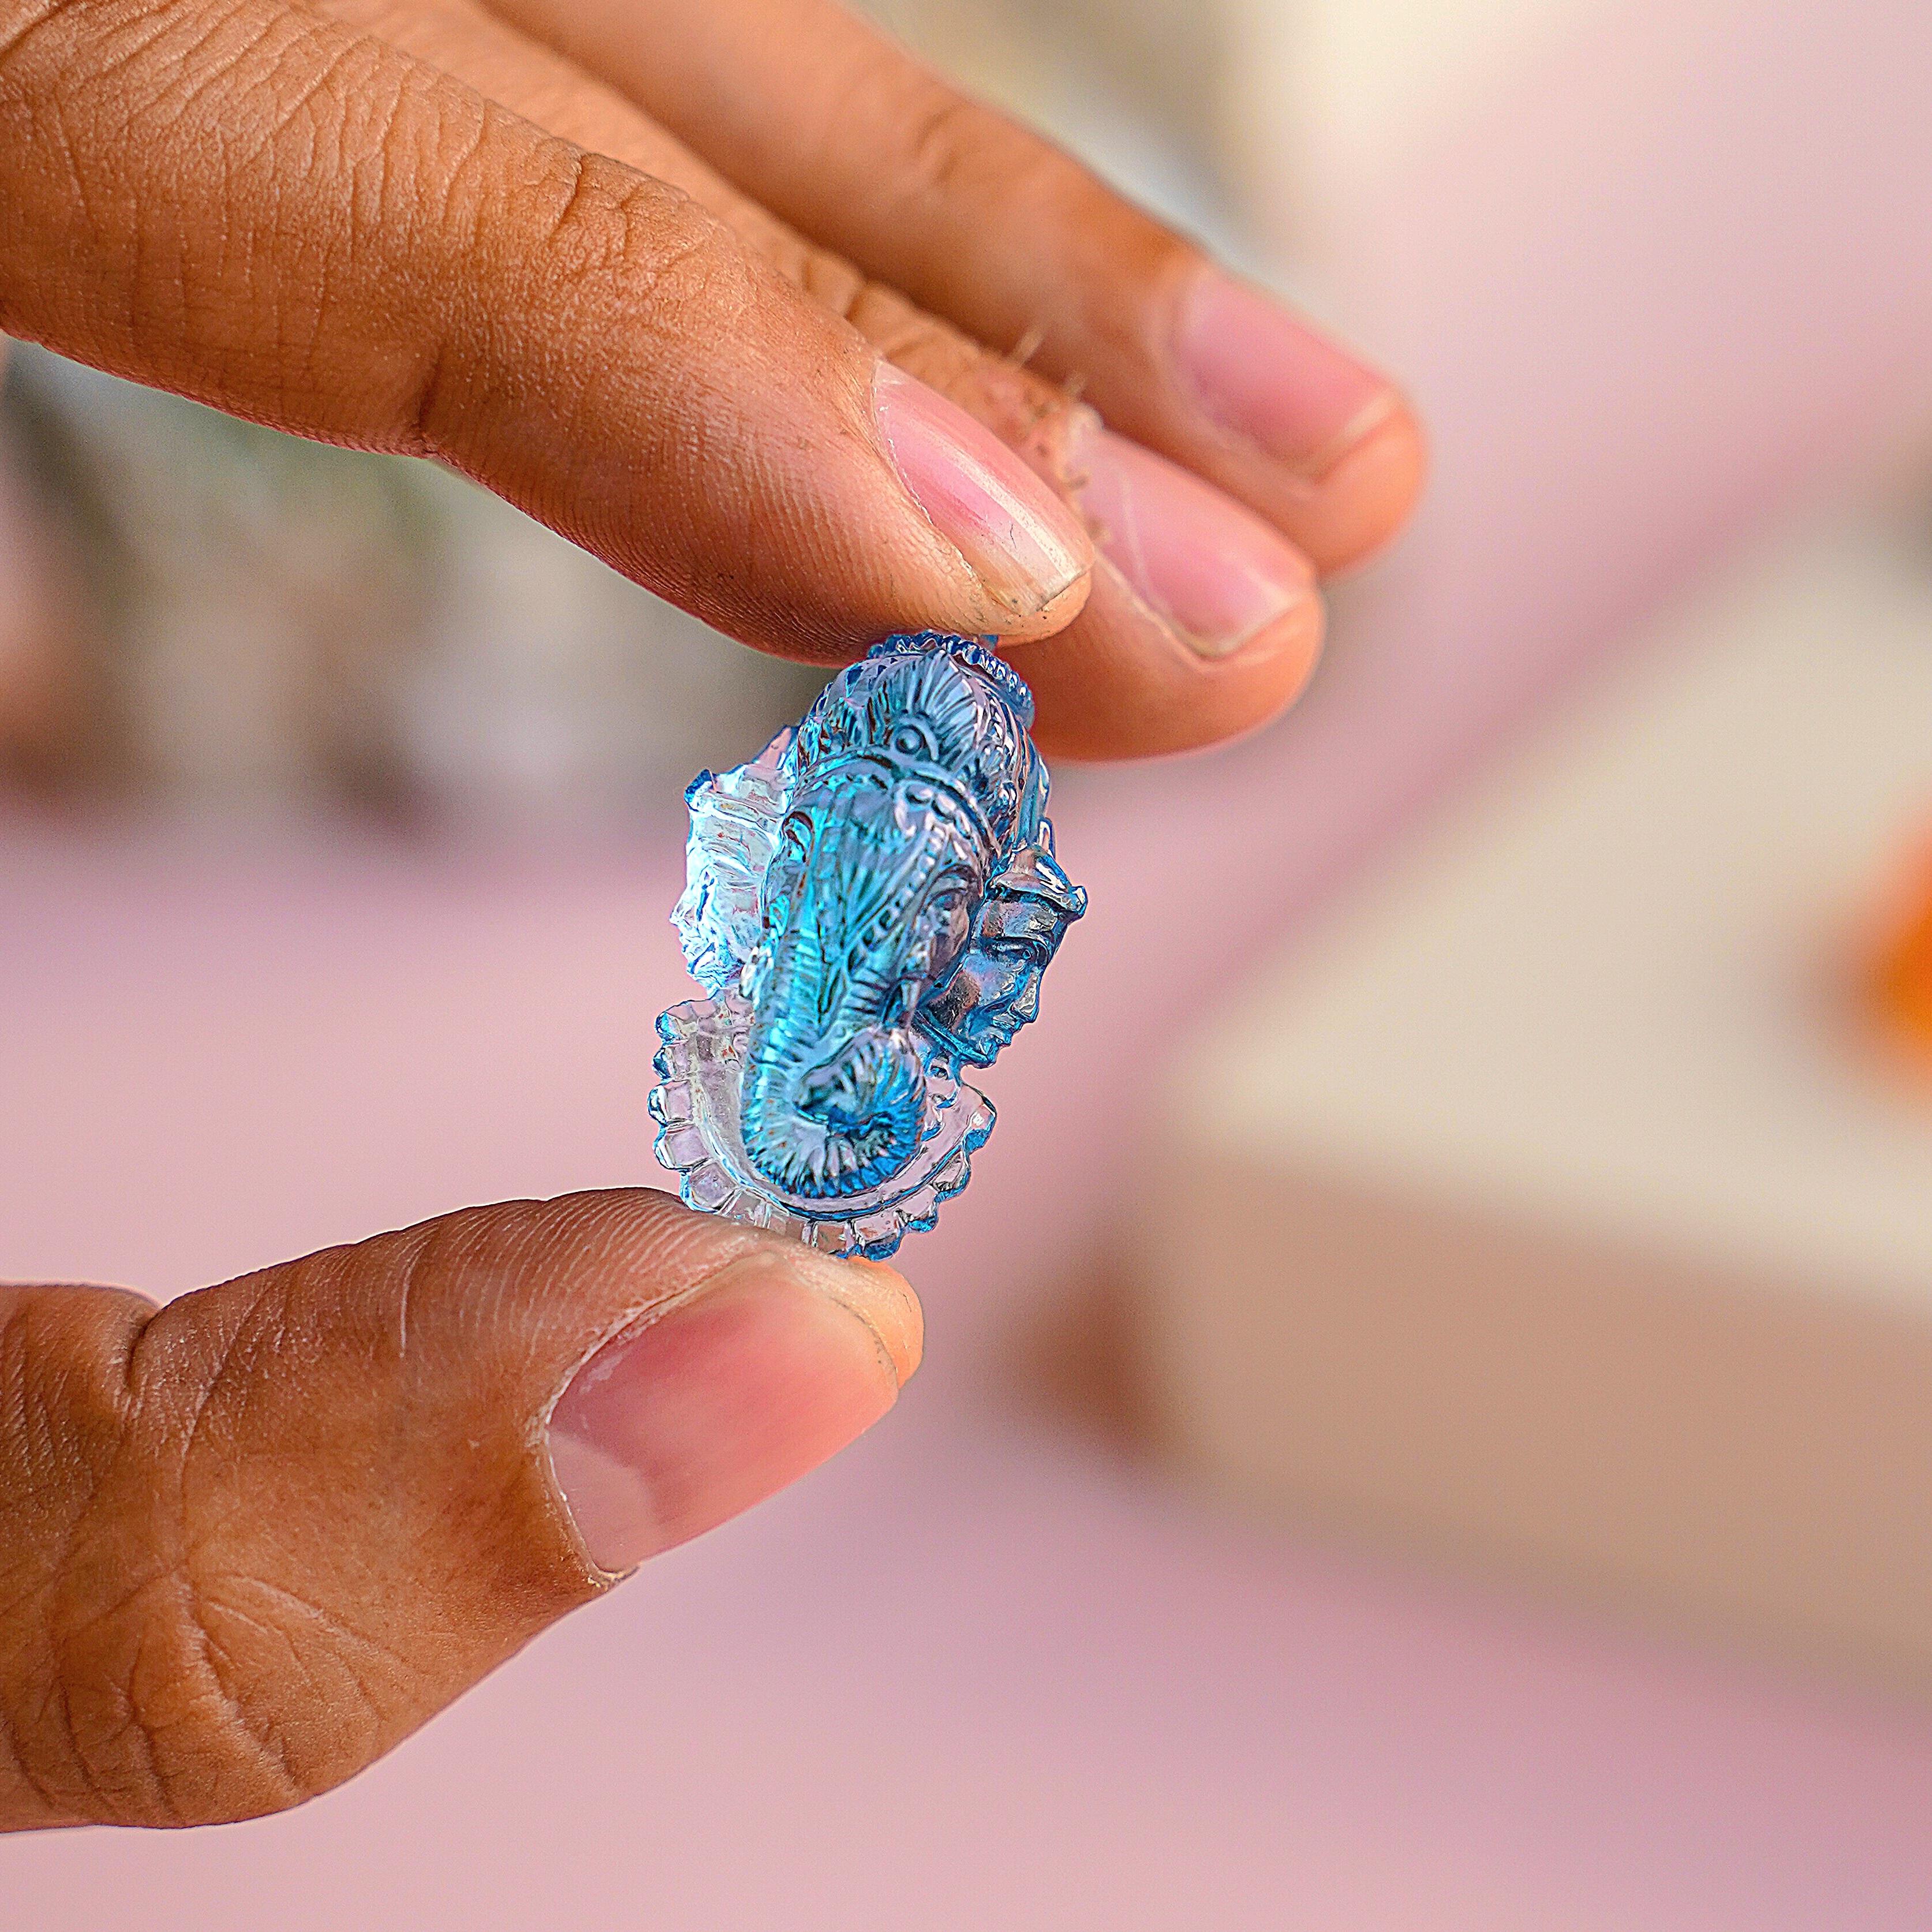 Our hand-carved 33.54 carat Swiss Blue Topaz Ganesha Riddhi Siddhi Carving Loose Gemstone is a magnificent work of art created with meticulous attention to detail by our expert lapidary artist in Jaipur. This extraordinary piece showcases the